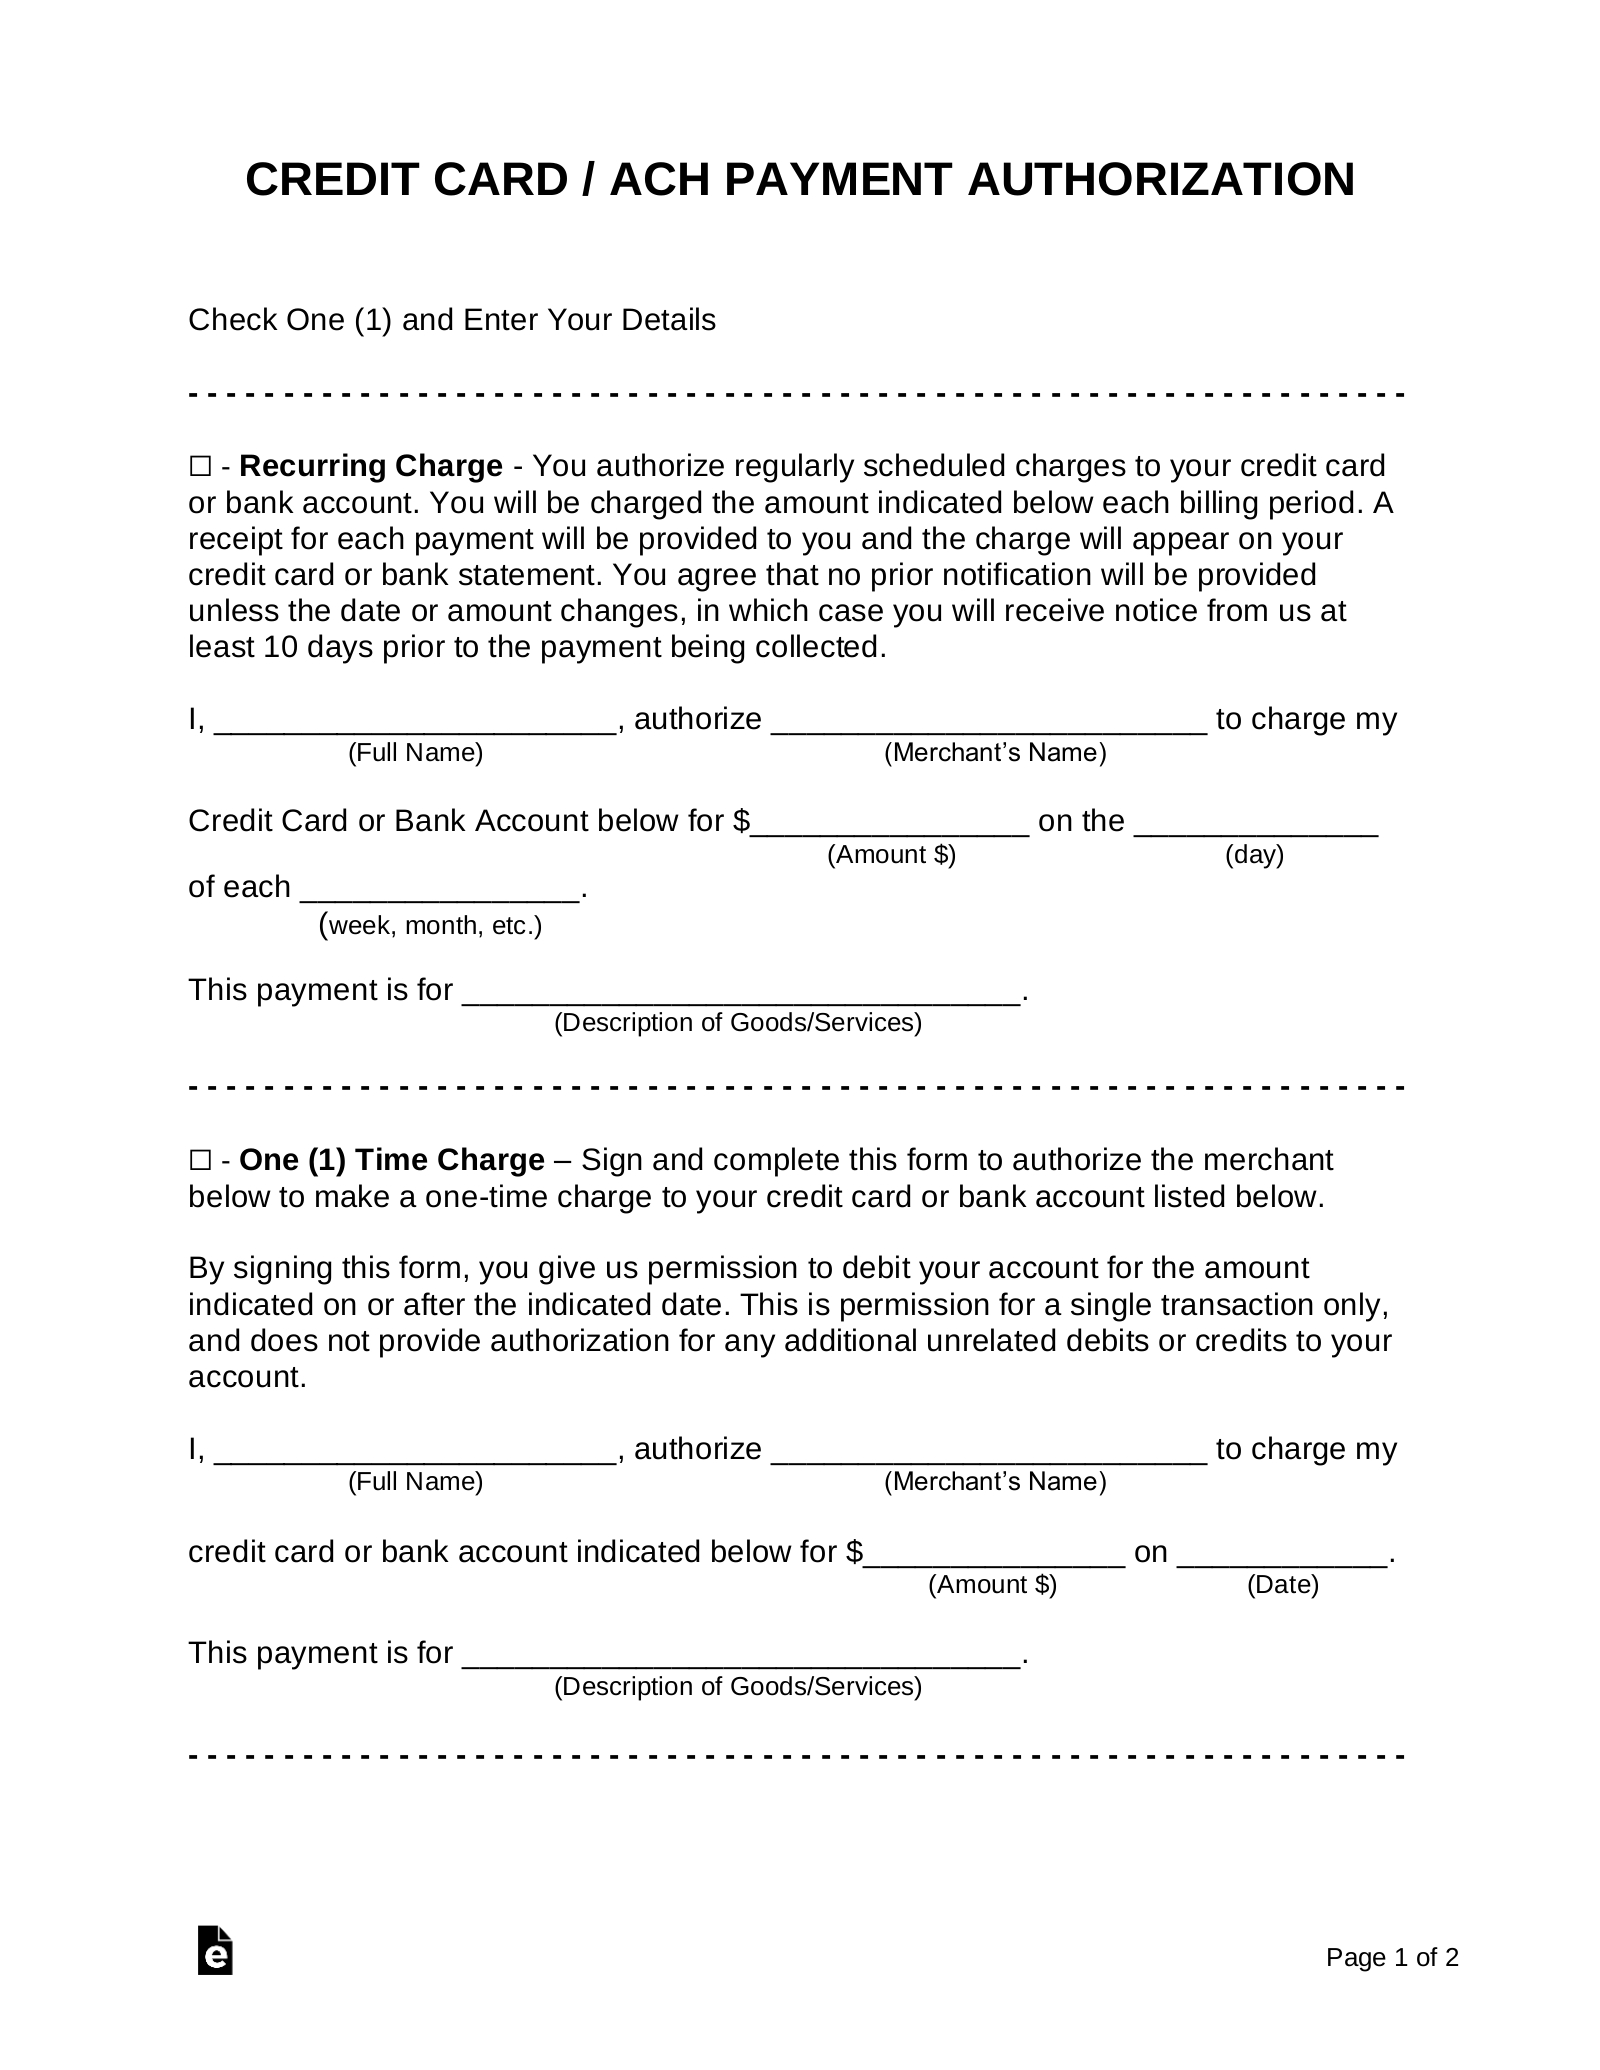 Free Credit Card (Ach) Authorization Forms – Pdf | Word Within Authorization To Charge Credit Card Template